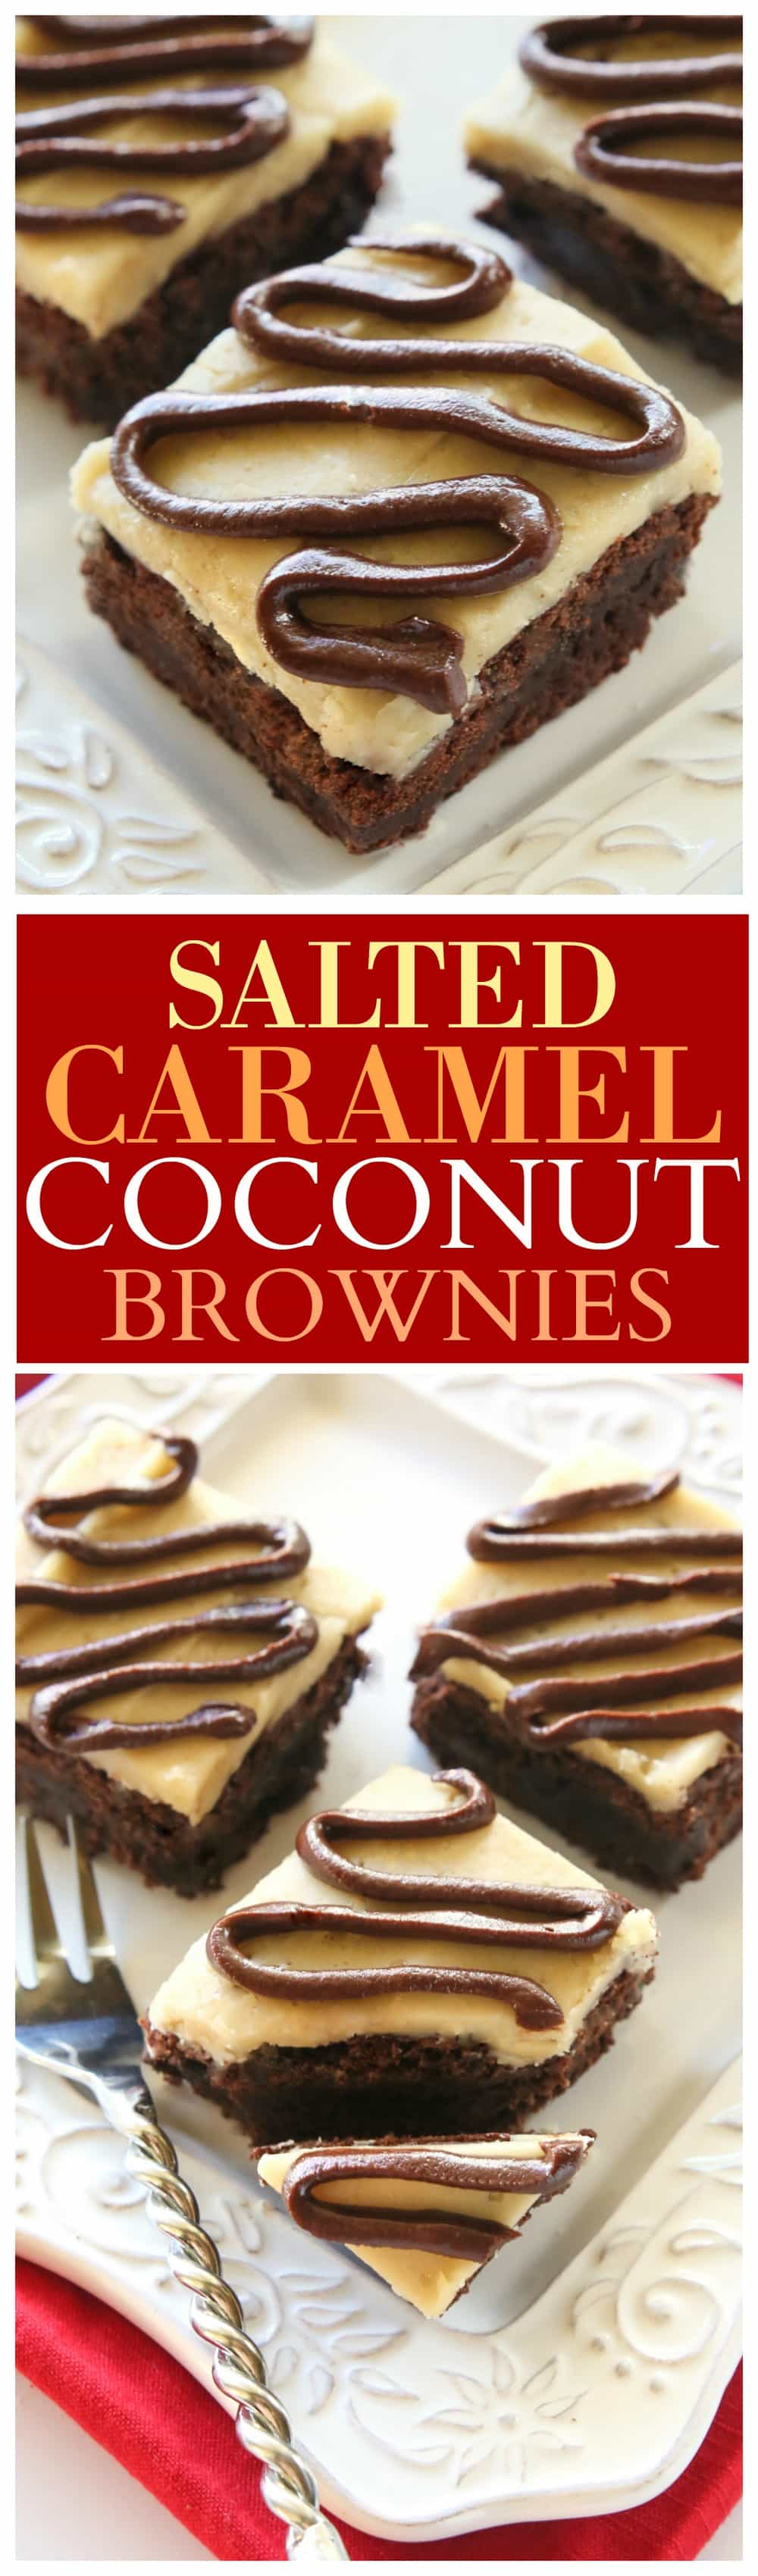 Salted Caramel Coconut Brownies - Moist, chewy coconut brownies with a salted caramel glaze and chocolate drizzle. #salted #caramel #coconut #brownies #dessert